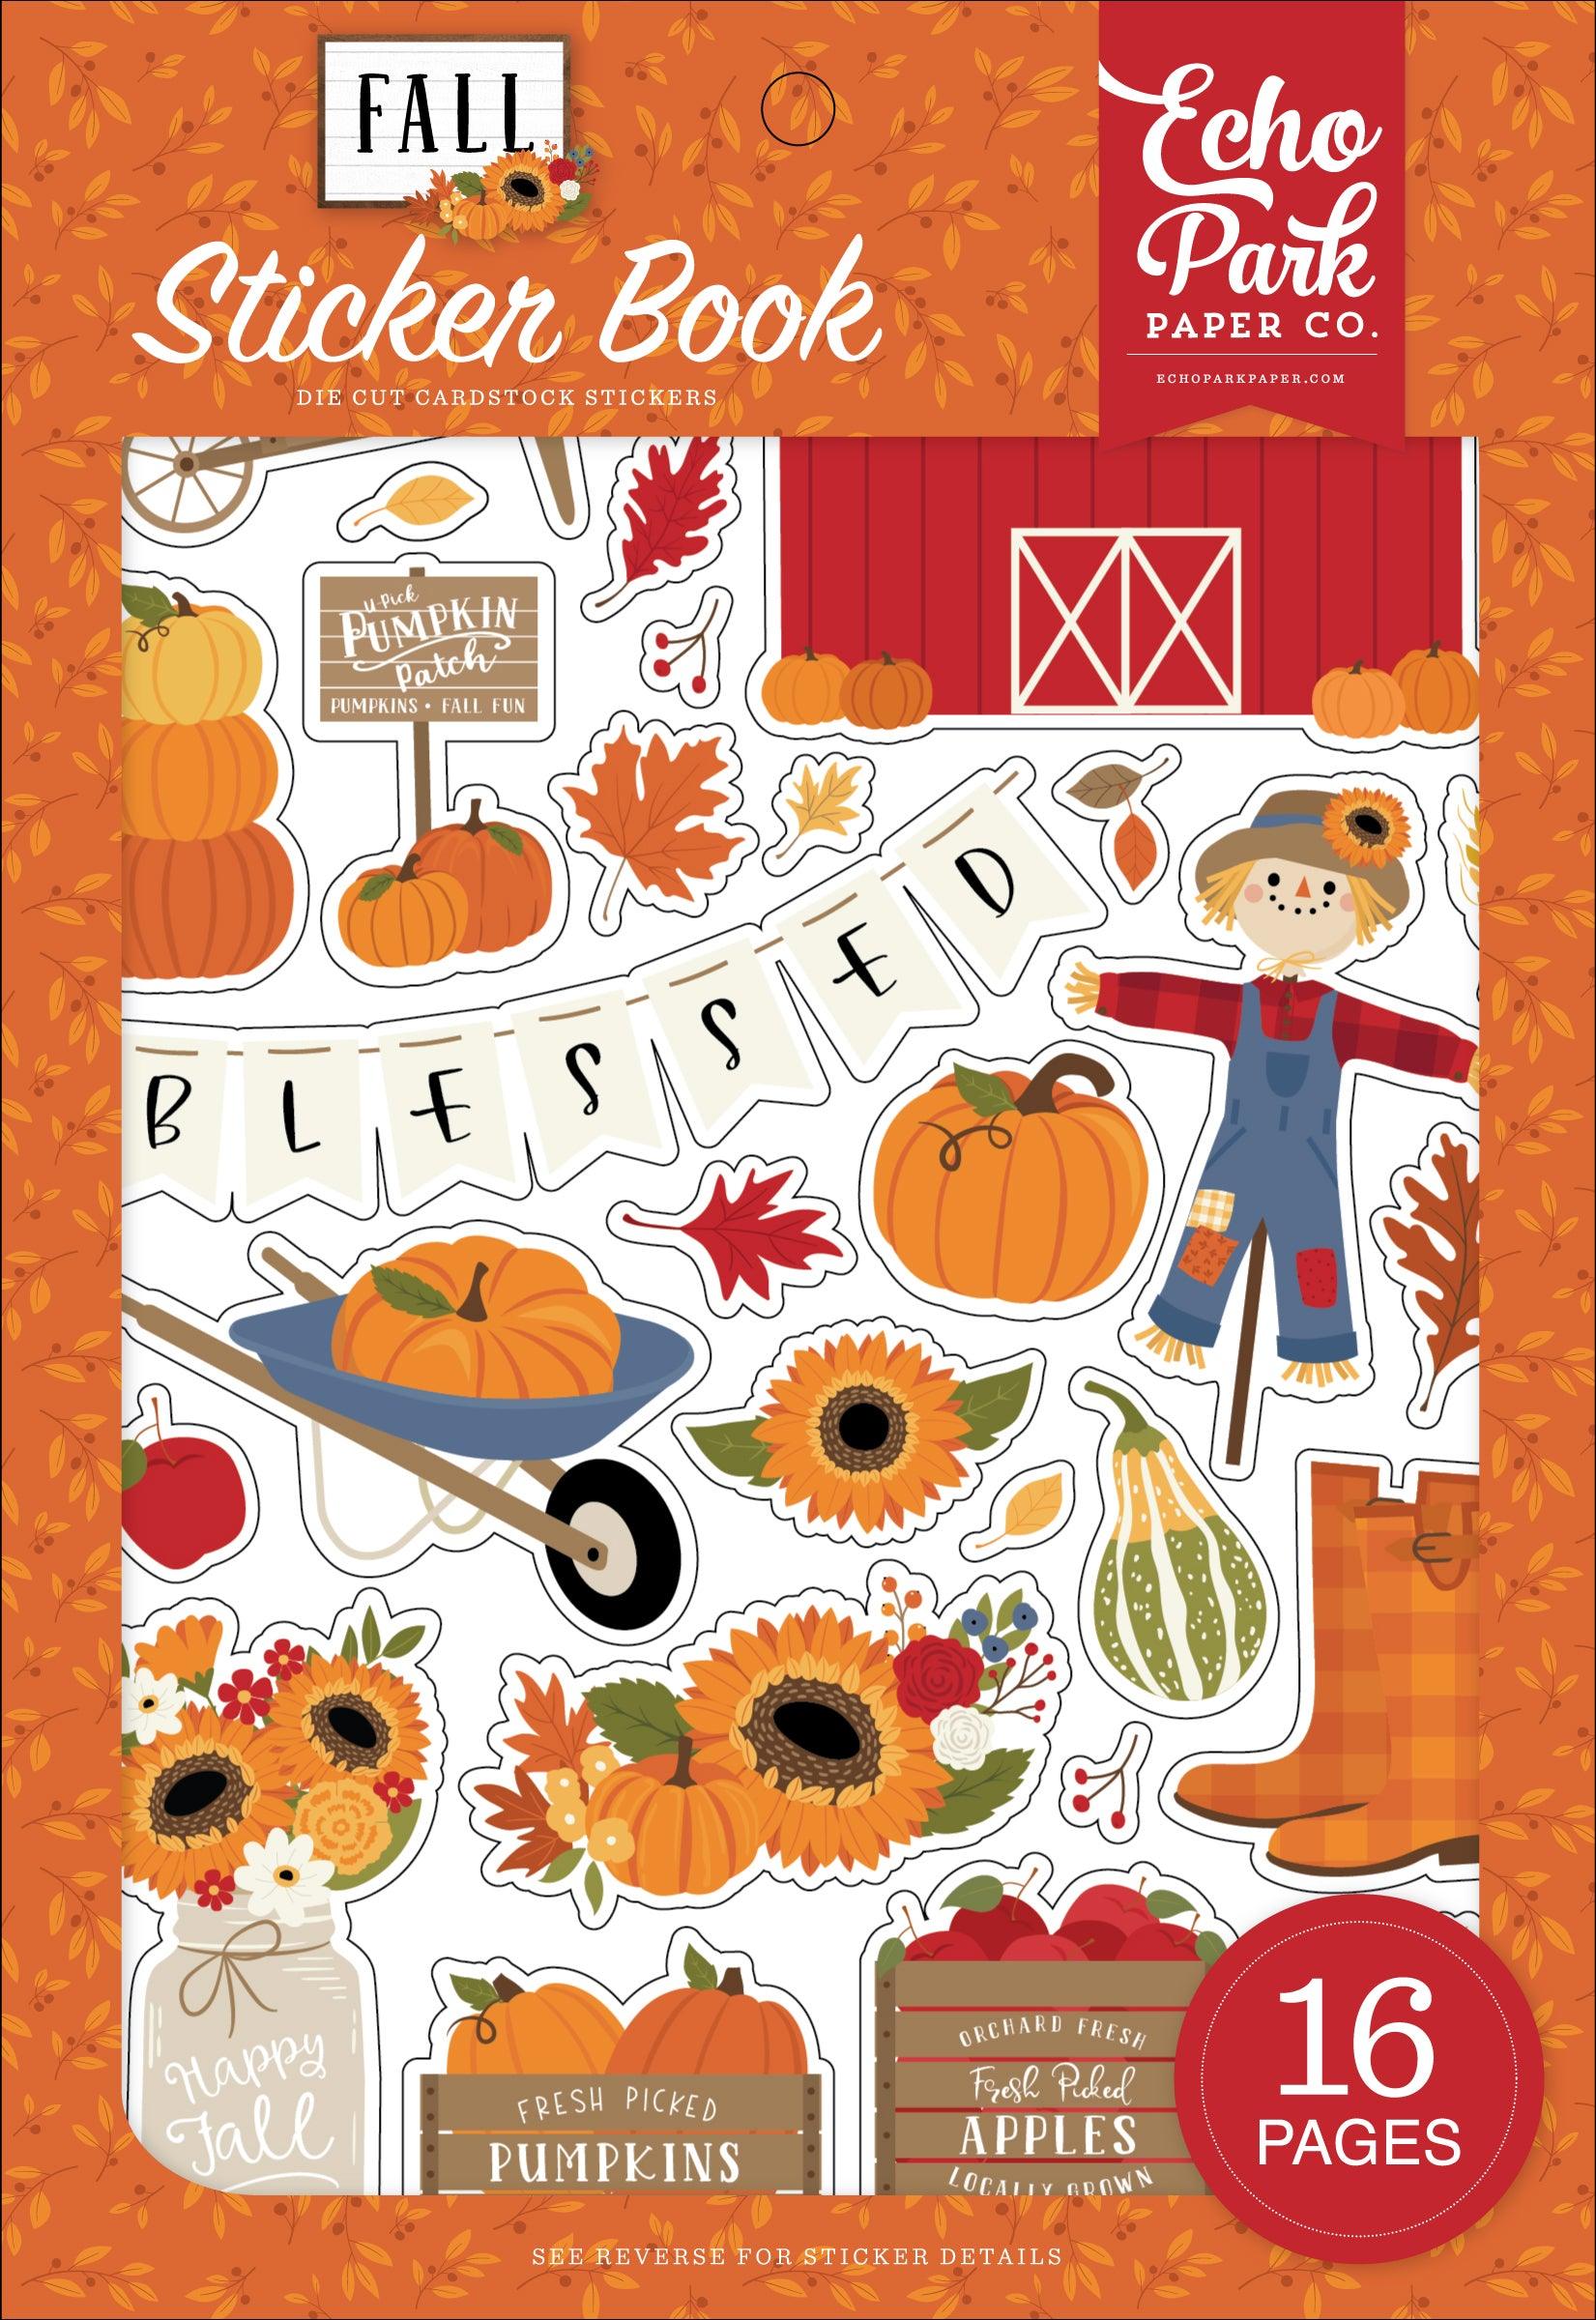 Fall Collection Sticker Book by Echo Park Paper-16 pages - Scrapbook Supply Companies